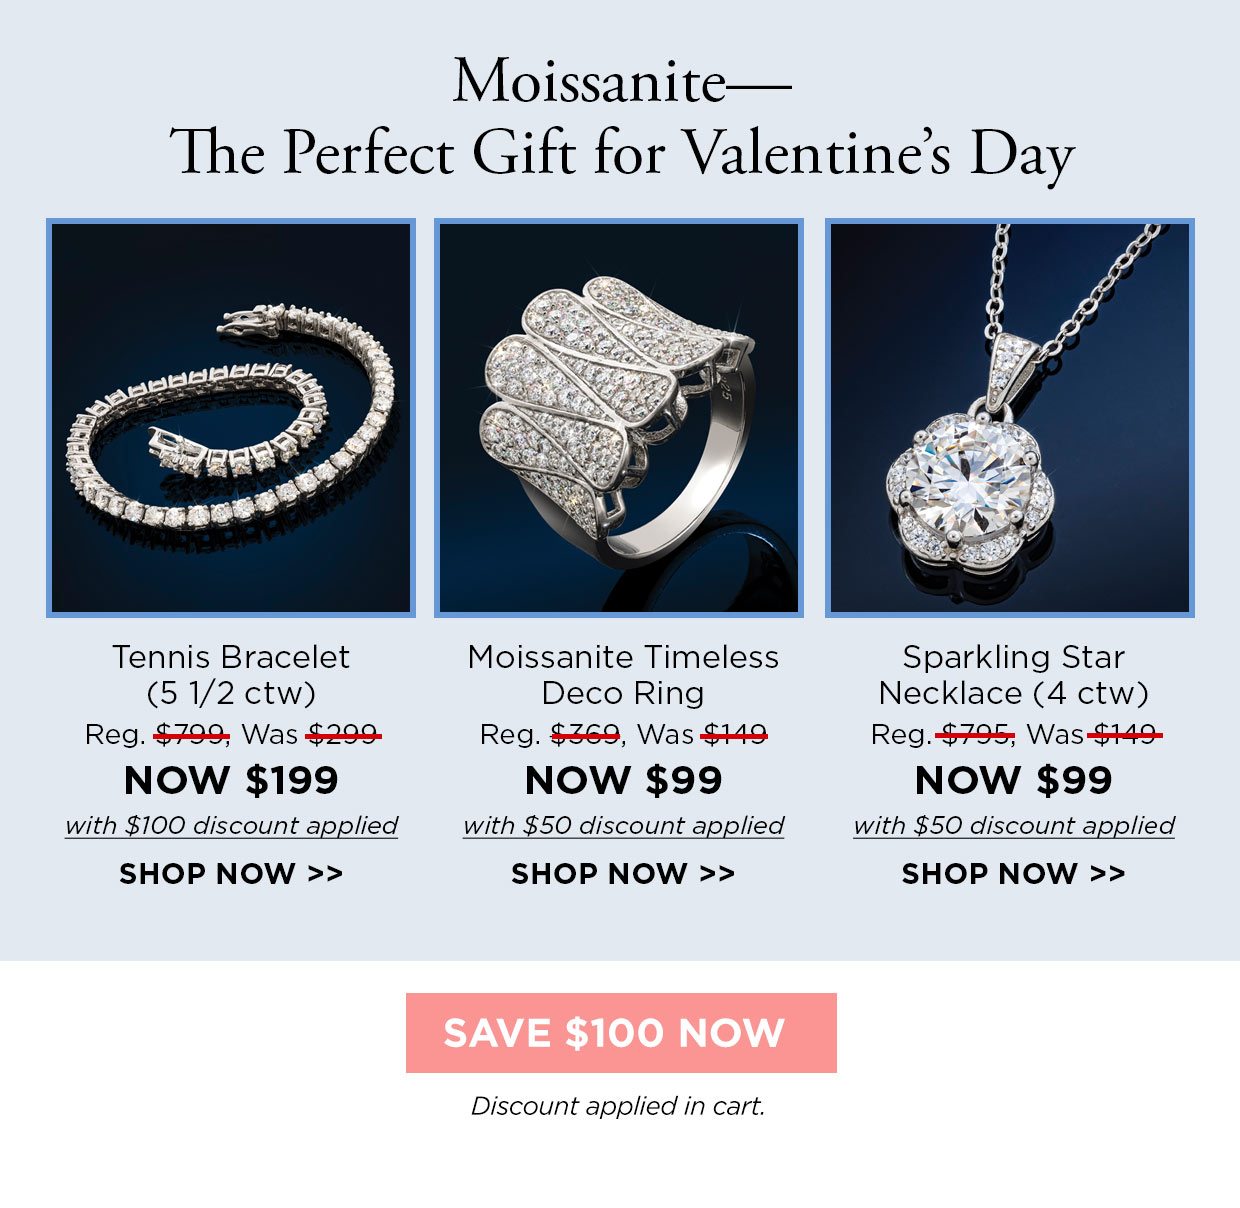 Moissanite- The Perfect Gift for Valentine's Day. Tennis Bracelet (51/2 ctw) Reg. $799, Was $299, NOW $199 with $100 discount applied. Moissanite Timeless Deco Ring Reg. $369, Was $149, NOW $99 with $50 discount applied. Sparkling Star Necklace (4 ctw) Reg. $795, Was $149, NOW $99 with $50 discount applied. Shop Now link. Save $100 Now button. Discount applied in cart.